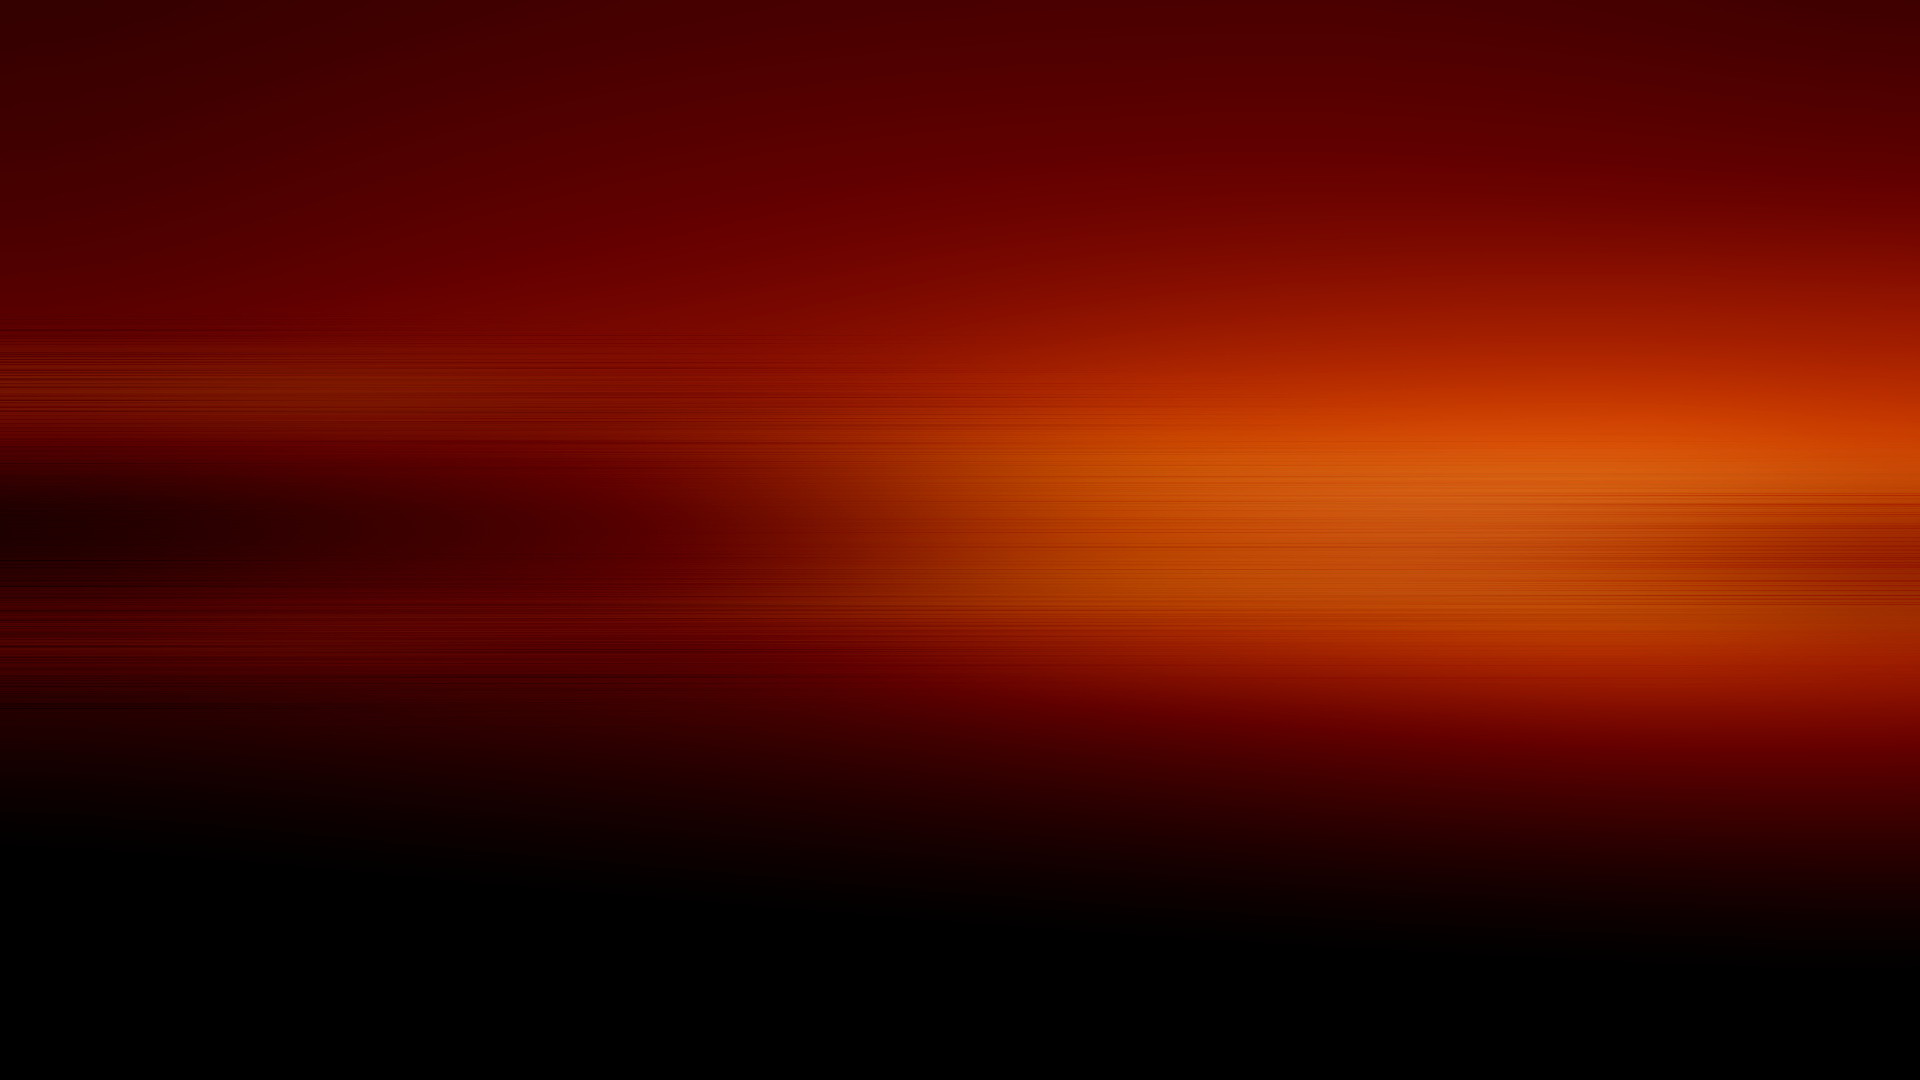 1920x1080, Plain Red Blurry Gallery Images - Red Sky At Morning - HD Wallpaper 